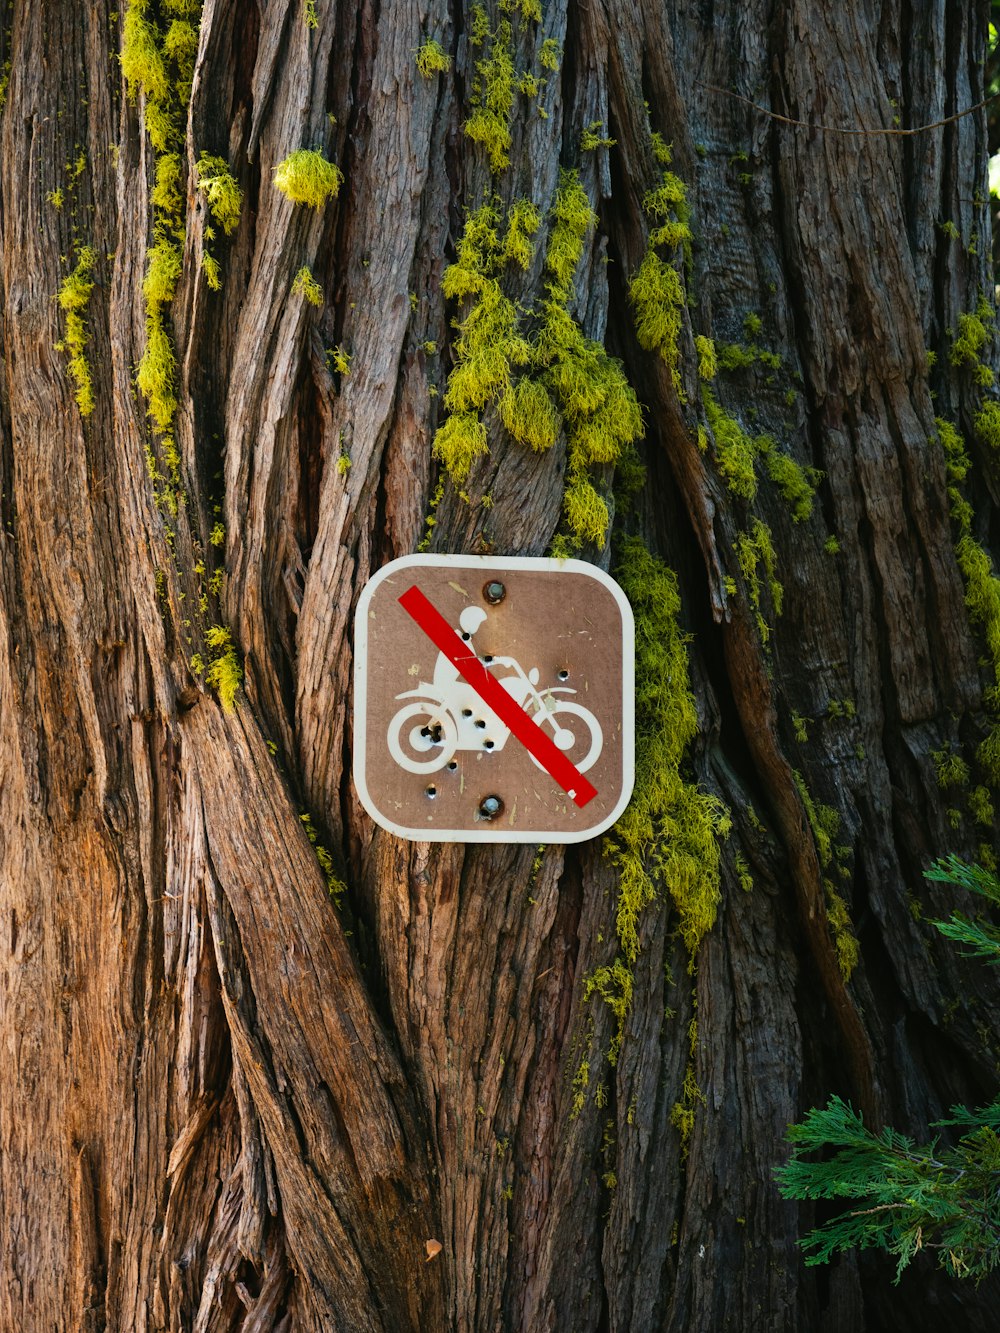 no riding of motorcycle sign on tree trunk